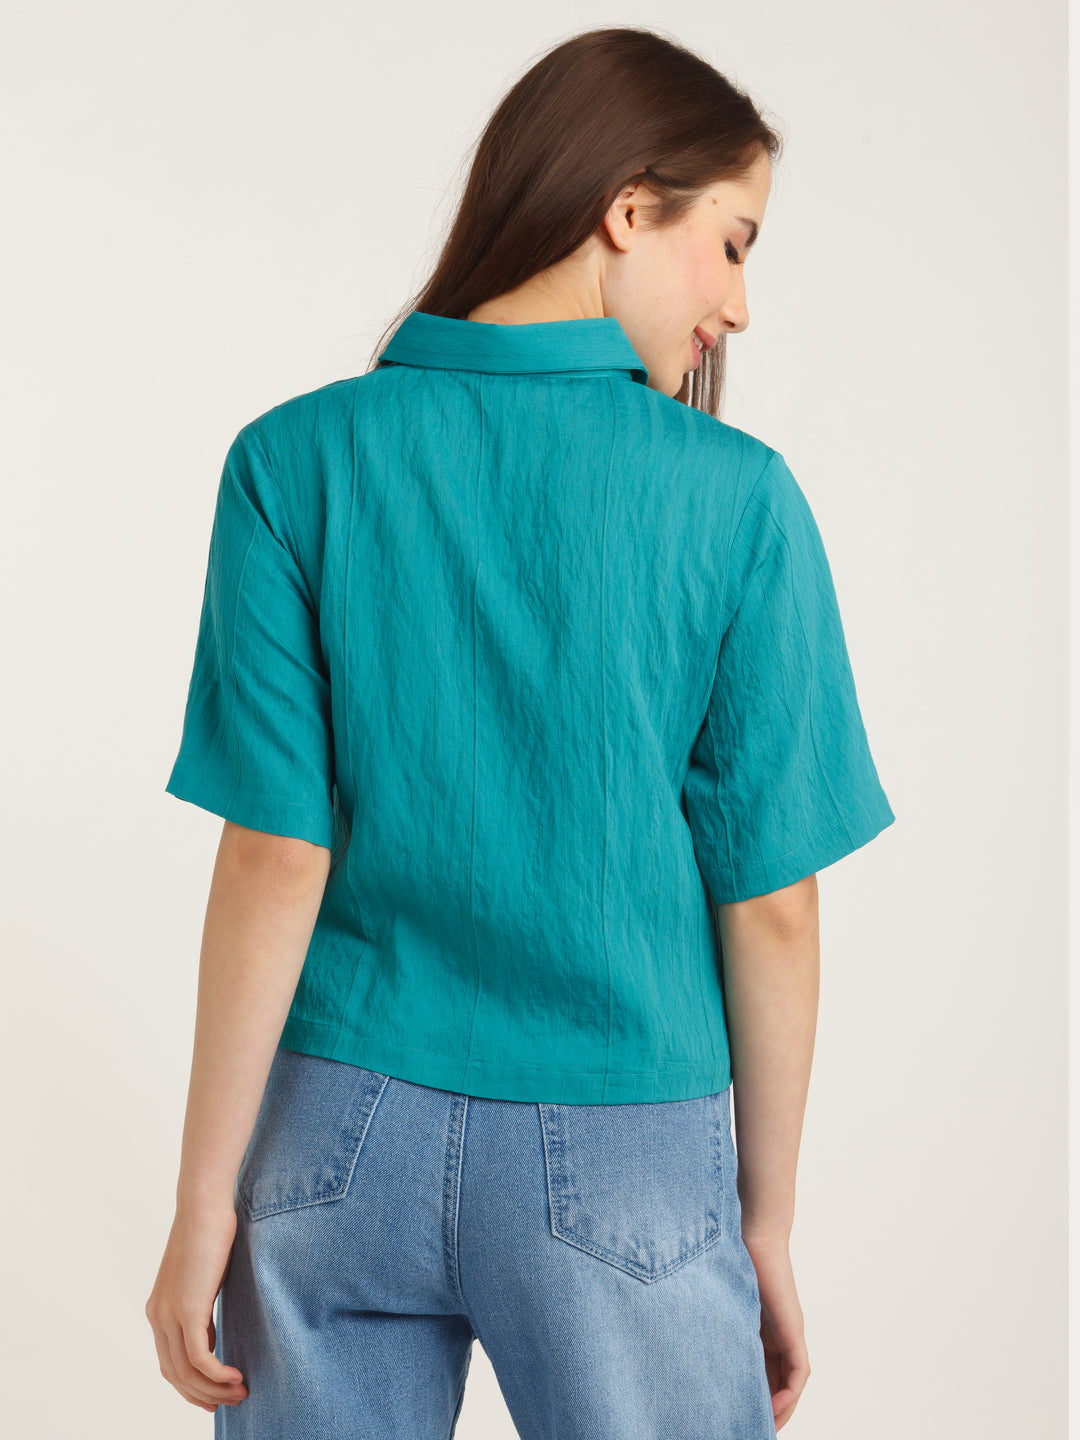 Teal-Solid-Shirt-for-Women-VT02958_118-Teal-4